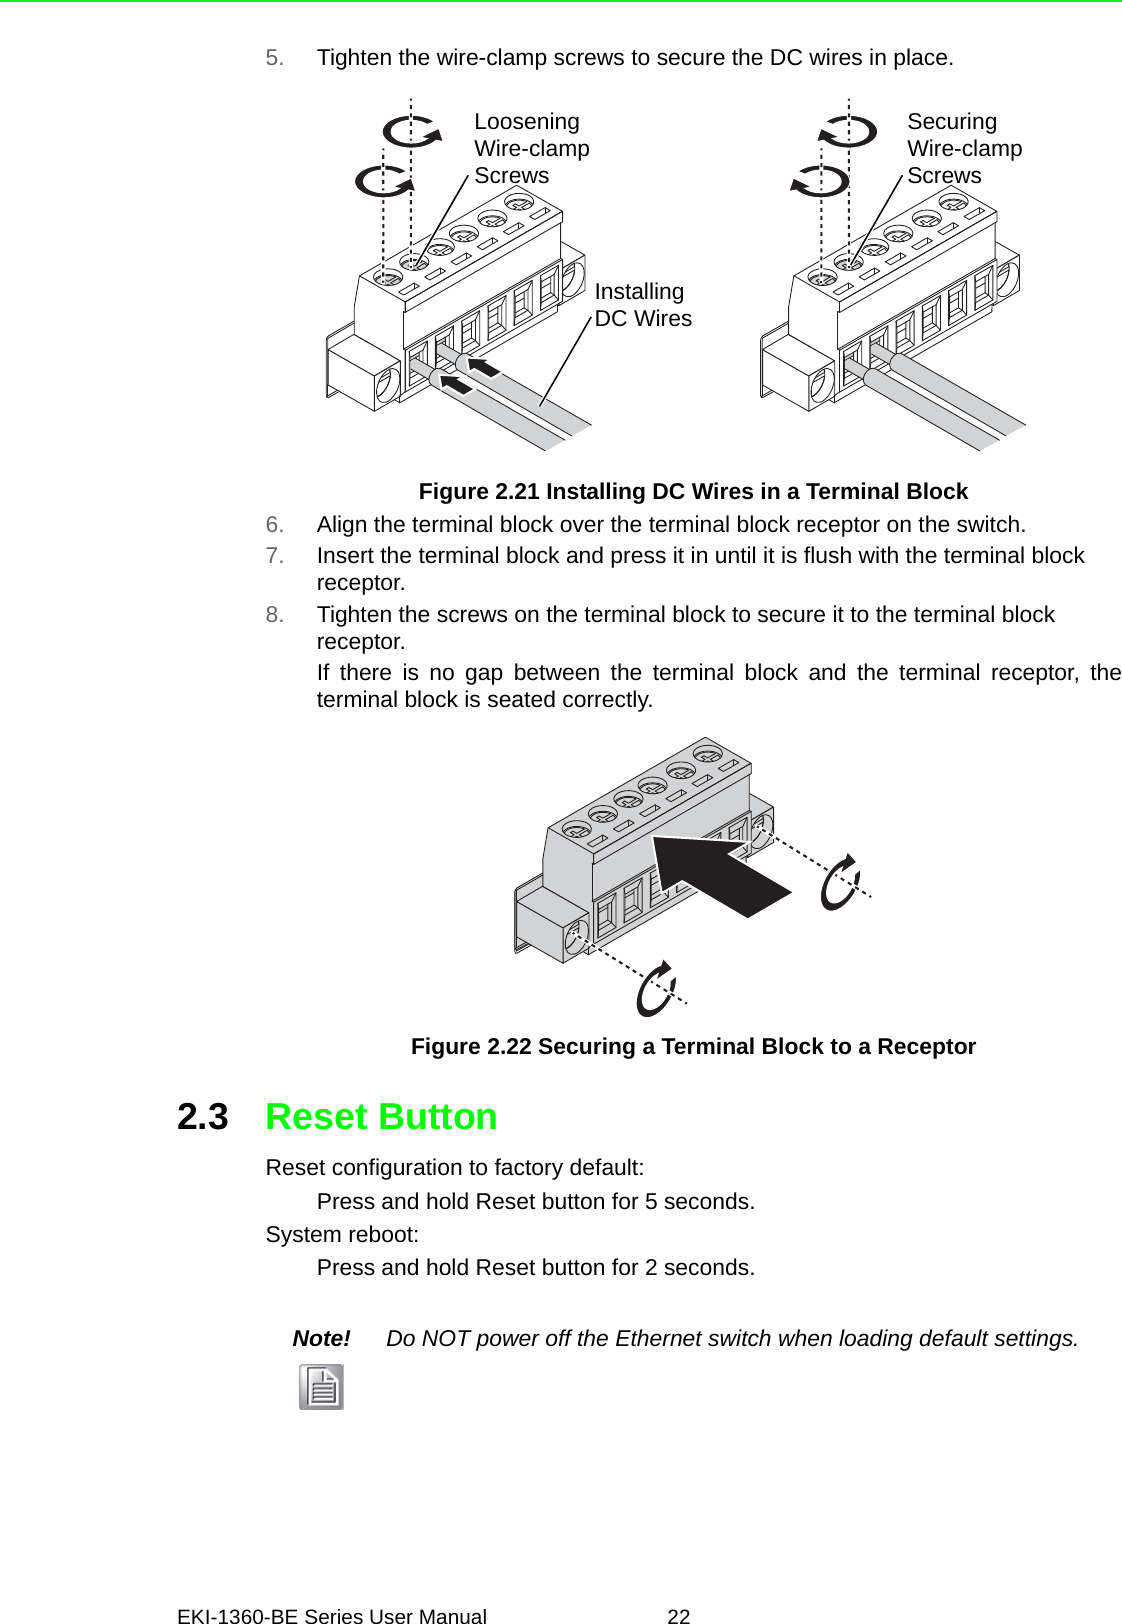 EKI-1360-BE Series User Manual 225. Tighten the wire-clamp screws to secure the DC wires in place.Figure 2.21 Installing DC Wires in a Terminal Block6. Align the terminal block over the terminal block receptor on the switch.7. Insert the terminal block and press it in until it is flush with the terminal block receptor.8. Tighten the screws on the terminal block to secure it to the terminal block receptor.If there is no gap between the terminal block and the terminal receptor, theterminal block is seated correctly.Figure 2.22 Securing a Terminal Block to a Receptor2.3 Reset ButtonReset configuration to factory default:Press and hold Reset button for 5 seconds.System reboot:Press and hold Reset button for 2 seconds.LooseningWire-clampScrewsInstallingDC WiresSecuringWire-clampScrewsNote! Do NOT power off the Ethernet switch when loading default settings.